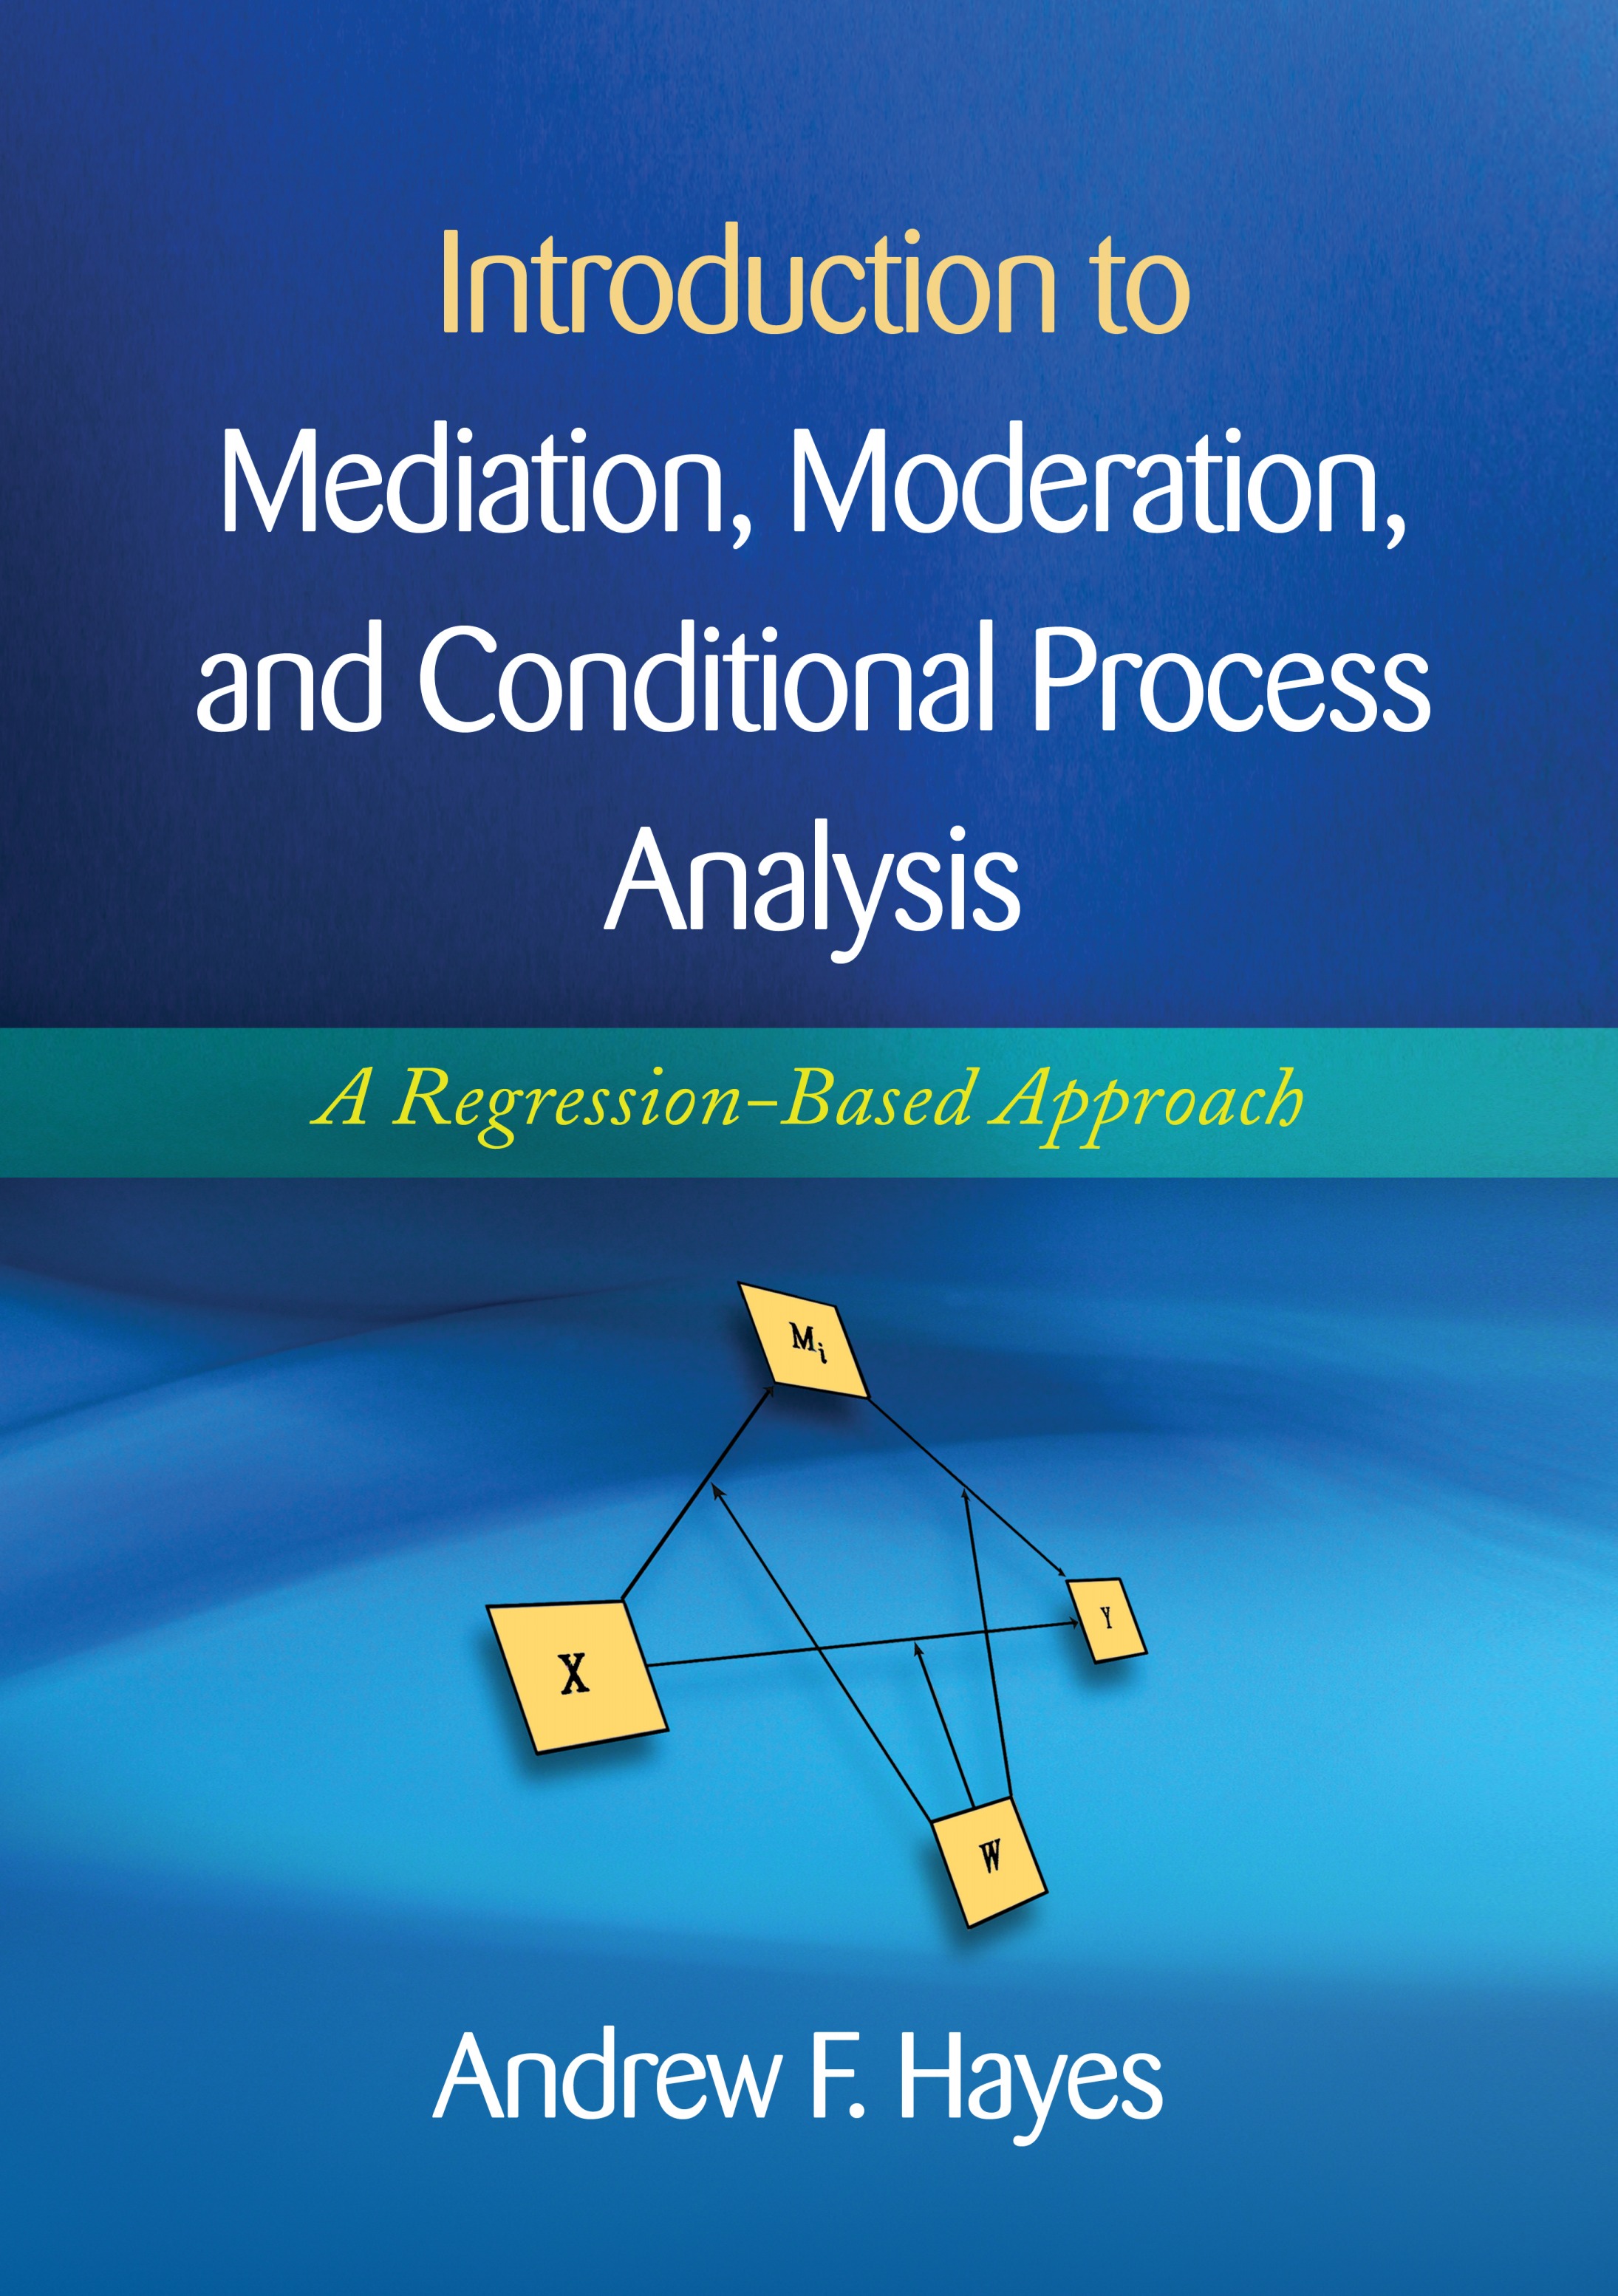 Introduction to Mediation, Moderation, and Conditional Process Analysis A Regres.jpg